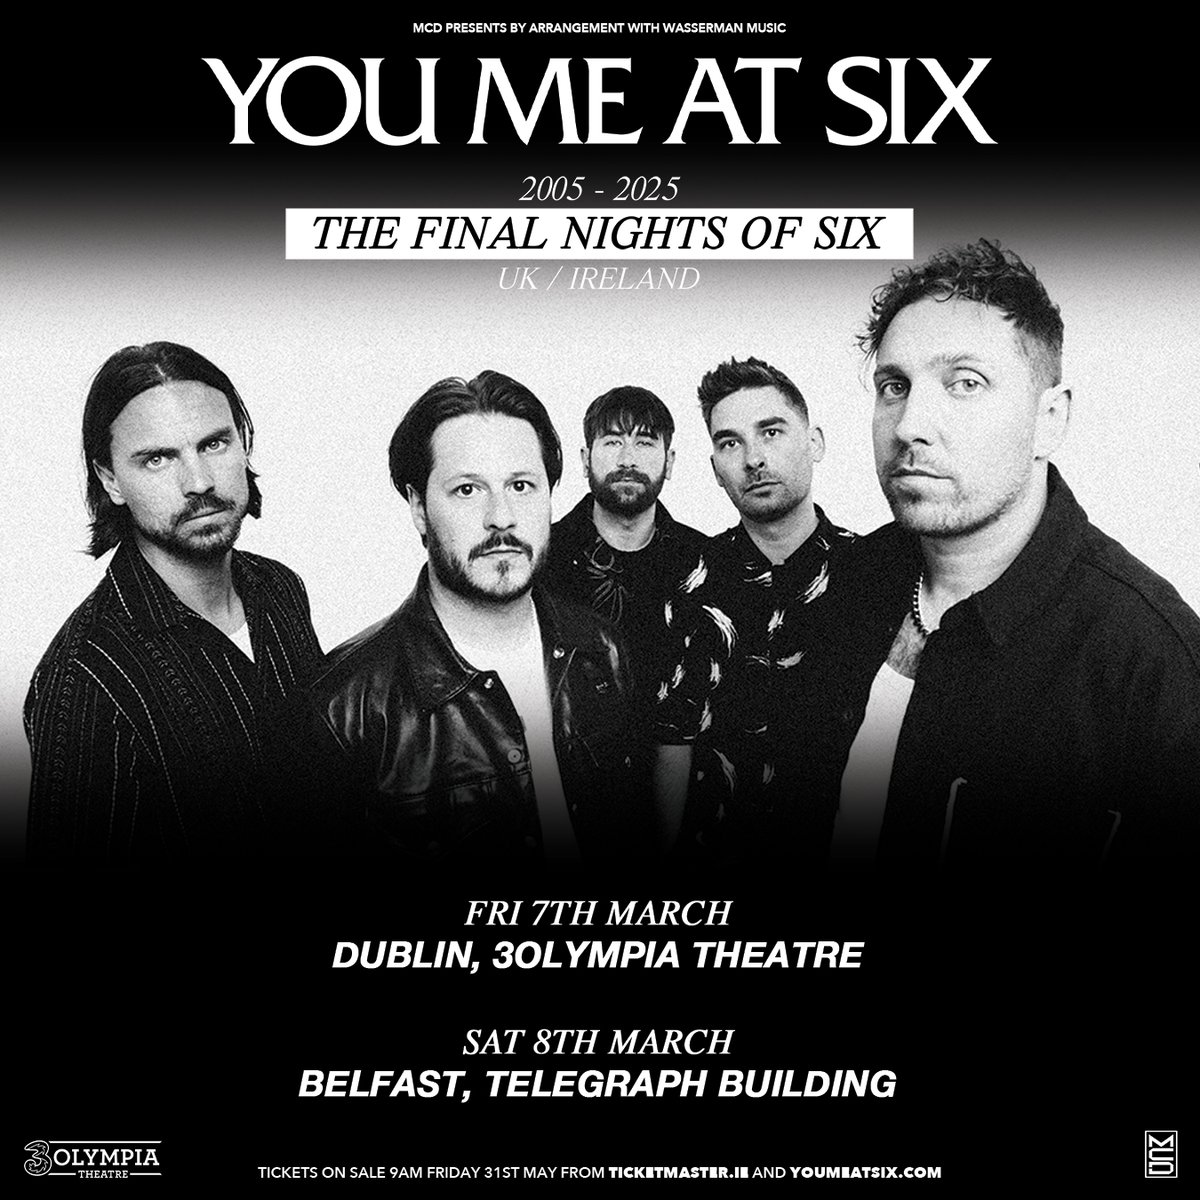 𝗝𝗨𝗦𝗧 𝗔𝗡𝗡𝗢𝗨𝗡𝗖𝗘𝗗 📣 @youmeatsix have announced their farewell tour will stop at The Telegraph Building, Belfast on Saturday 8th March 2025! 🔥 𝗪𝗜𝗡 𝗧𝗜𝗖𝗞𝗘𝗧𝗦: For a chance to win a pair of tickets: LIKE/ REPOST & TAG Tickets on sale Friday 31st May 9am.